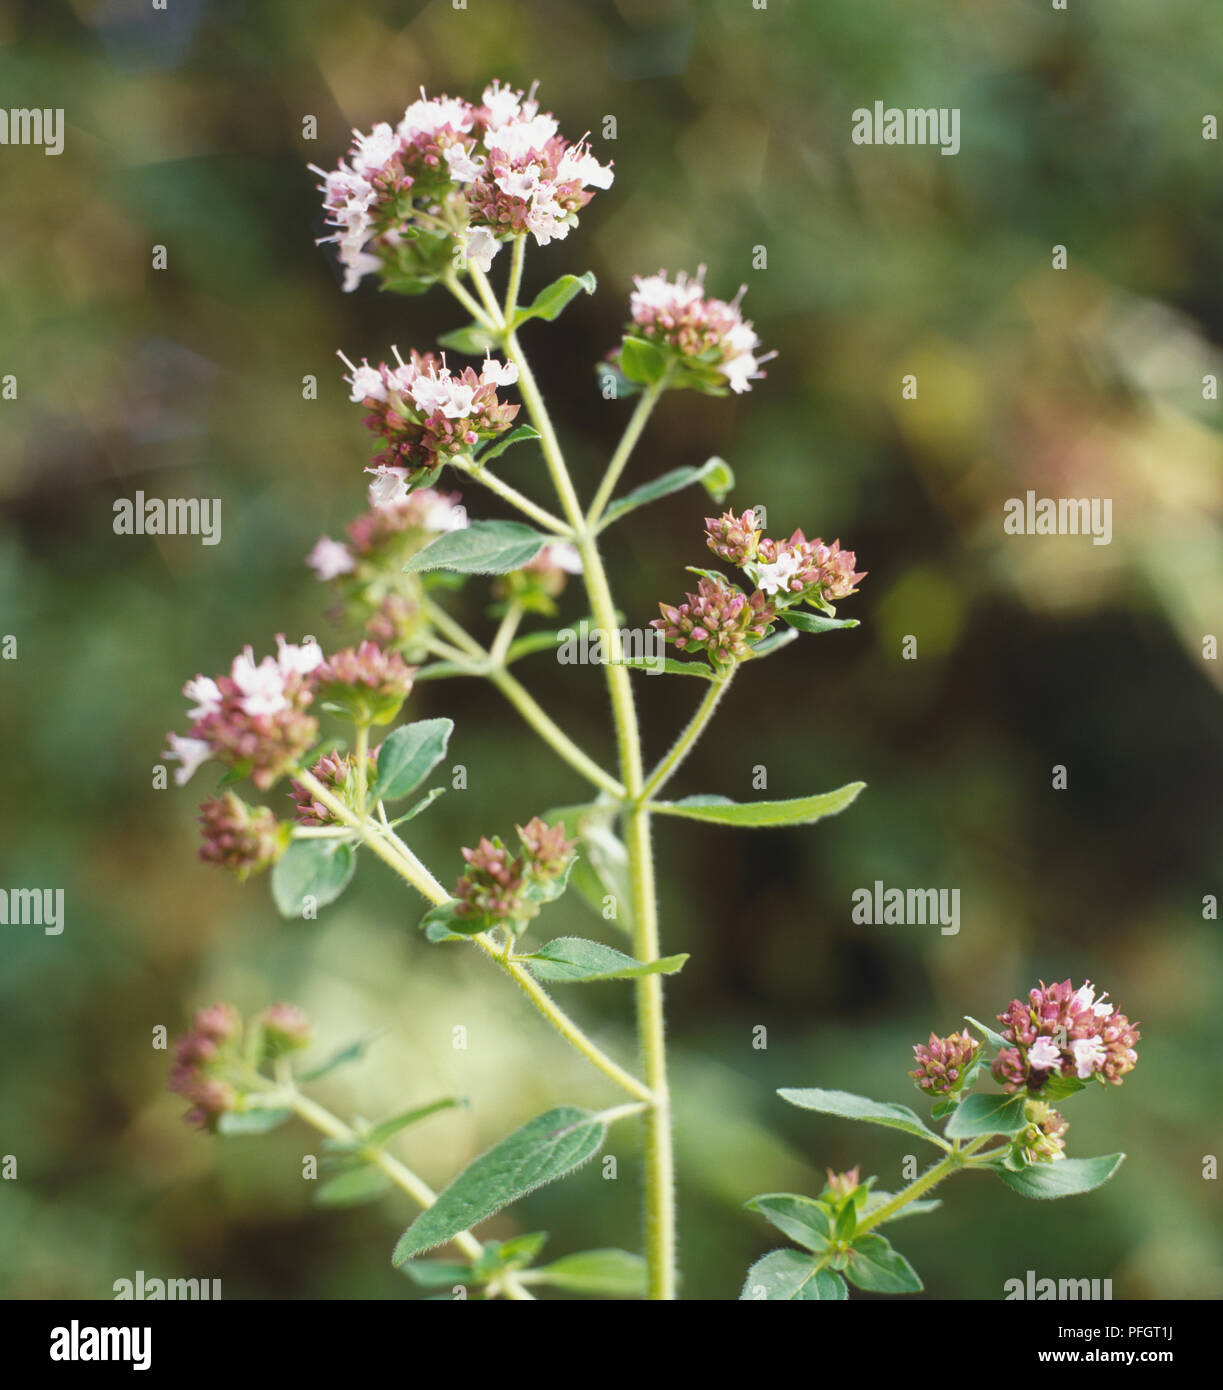 French Marjoram, French Oregano (Origanum x onites), clusters of tiny, tubular, pale pink flowers with oval green leaves on thin stems, close-up Stock Photo